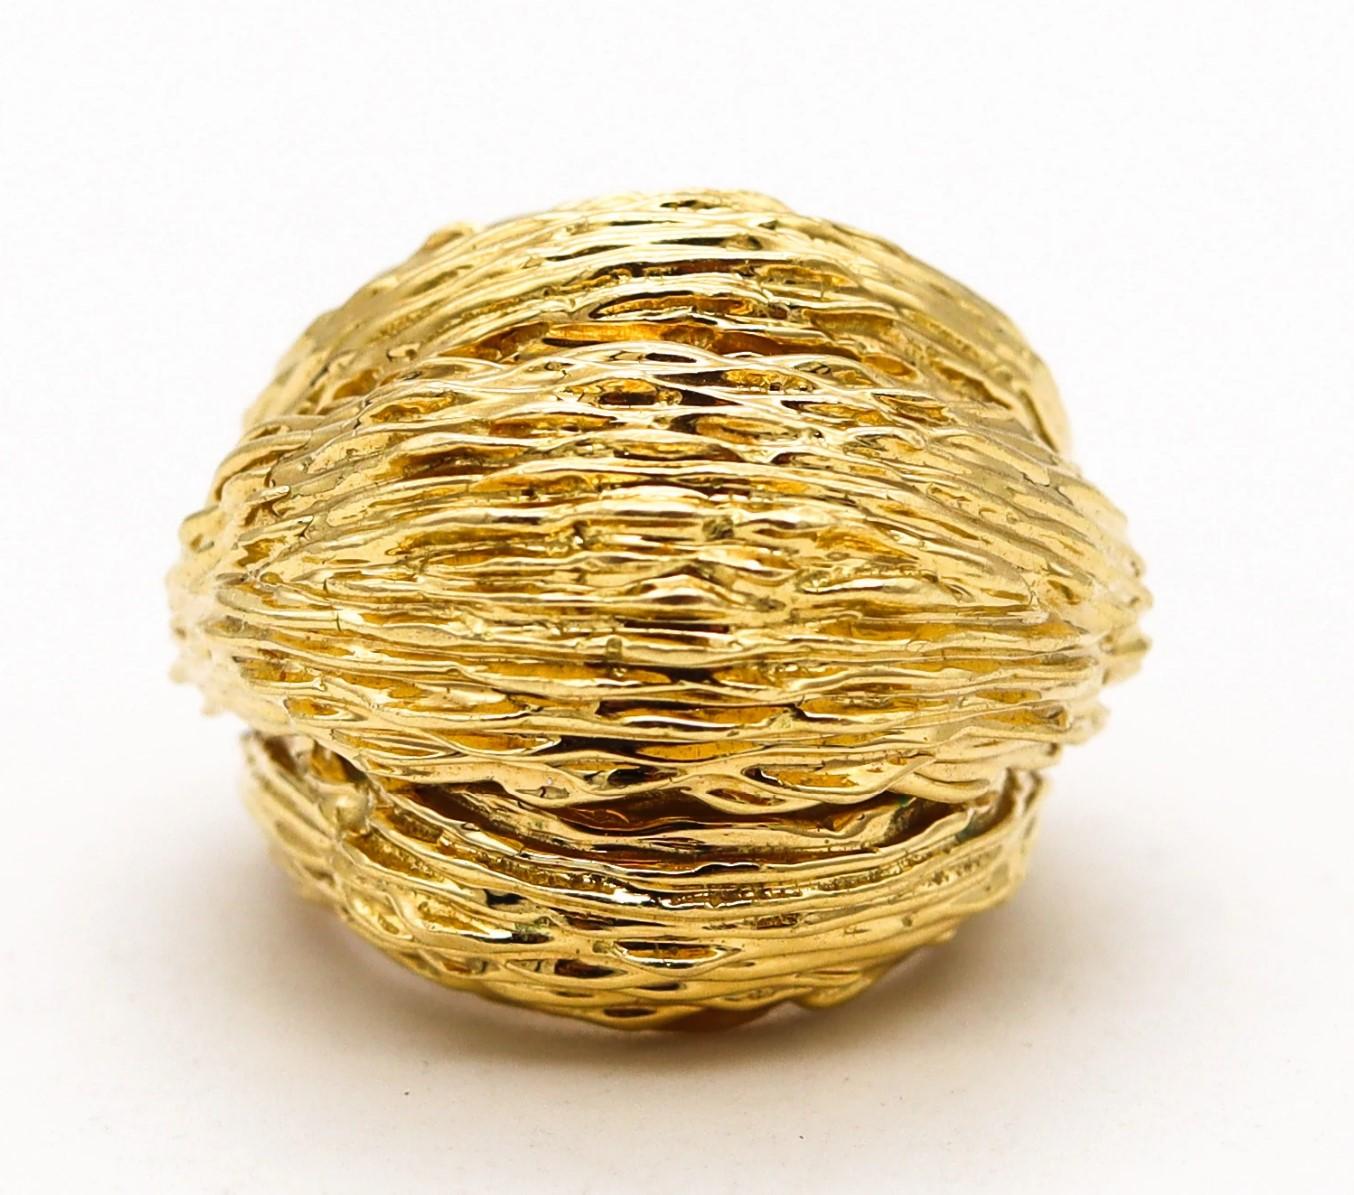 Bombe cocktail Ring designed by Van Cleef & Arpels.

An estatement bold piece, created by the house of Van Cleef & Arpels, back in the 1970's. This bombe cocktail ring is composed by three corps, crafted in highly textured solid yellow gold of 18